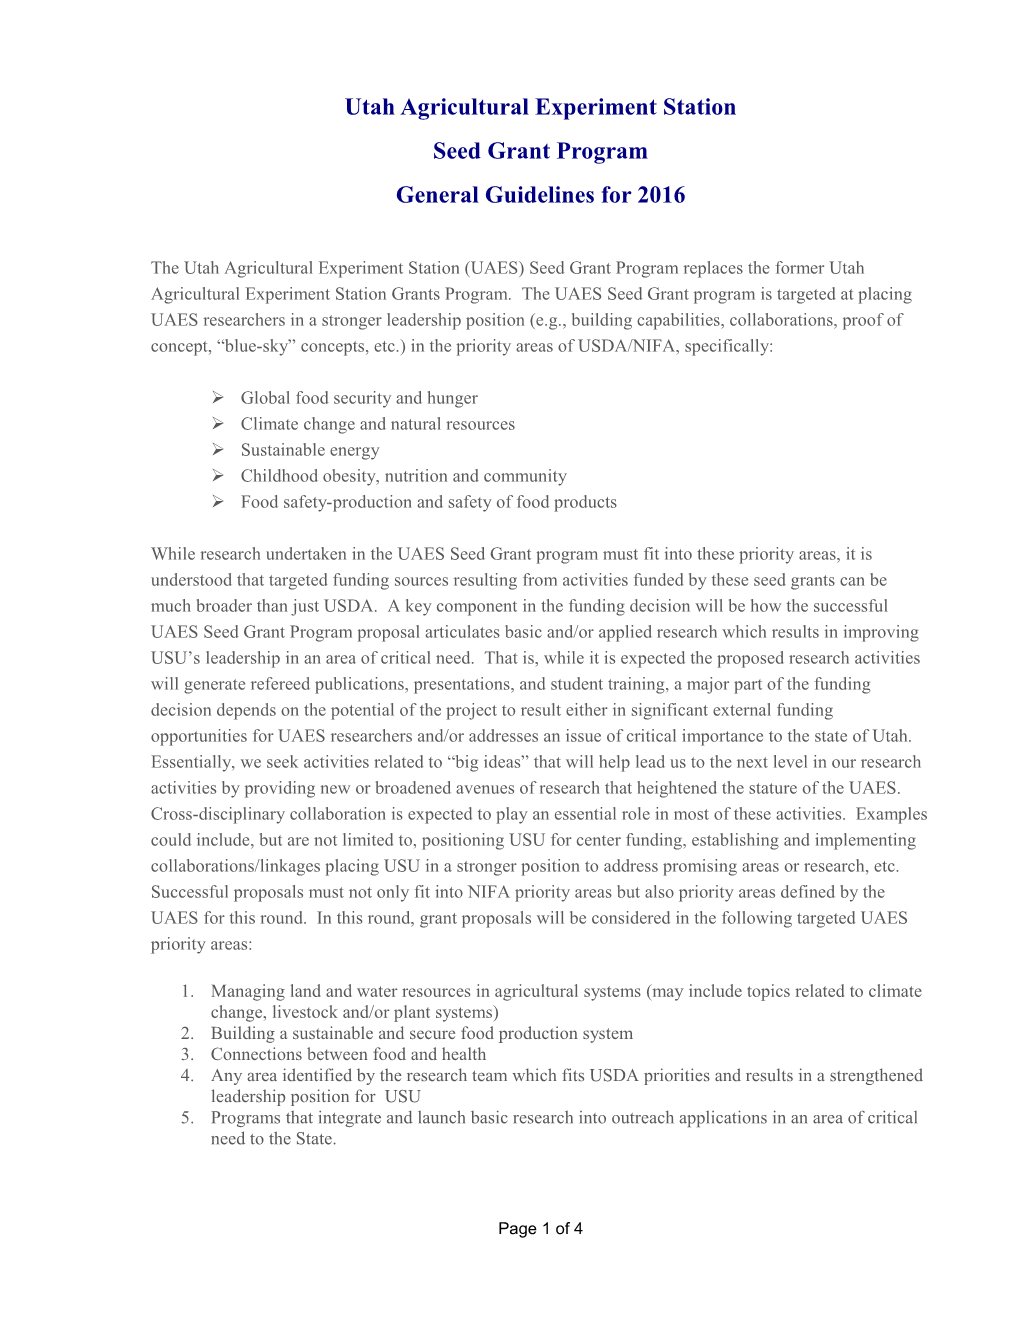 CURI General Guidelines for 2007-2008